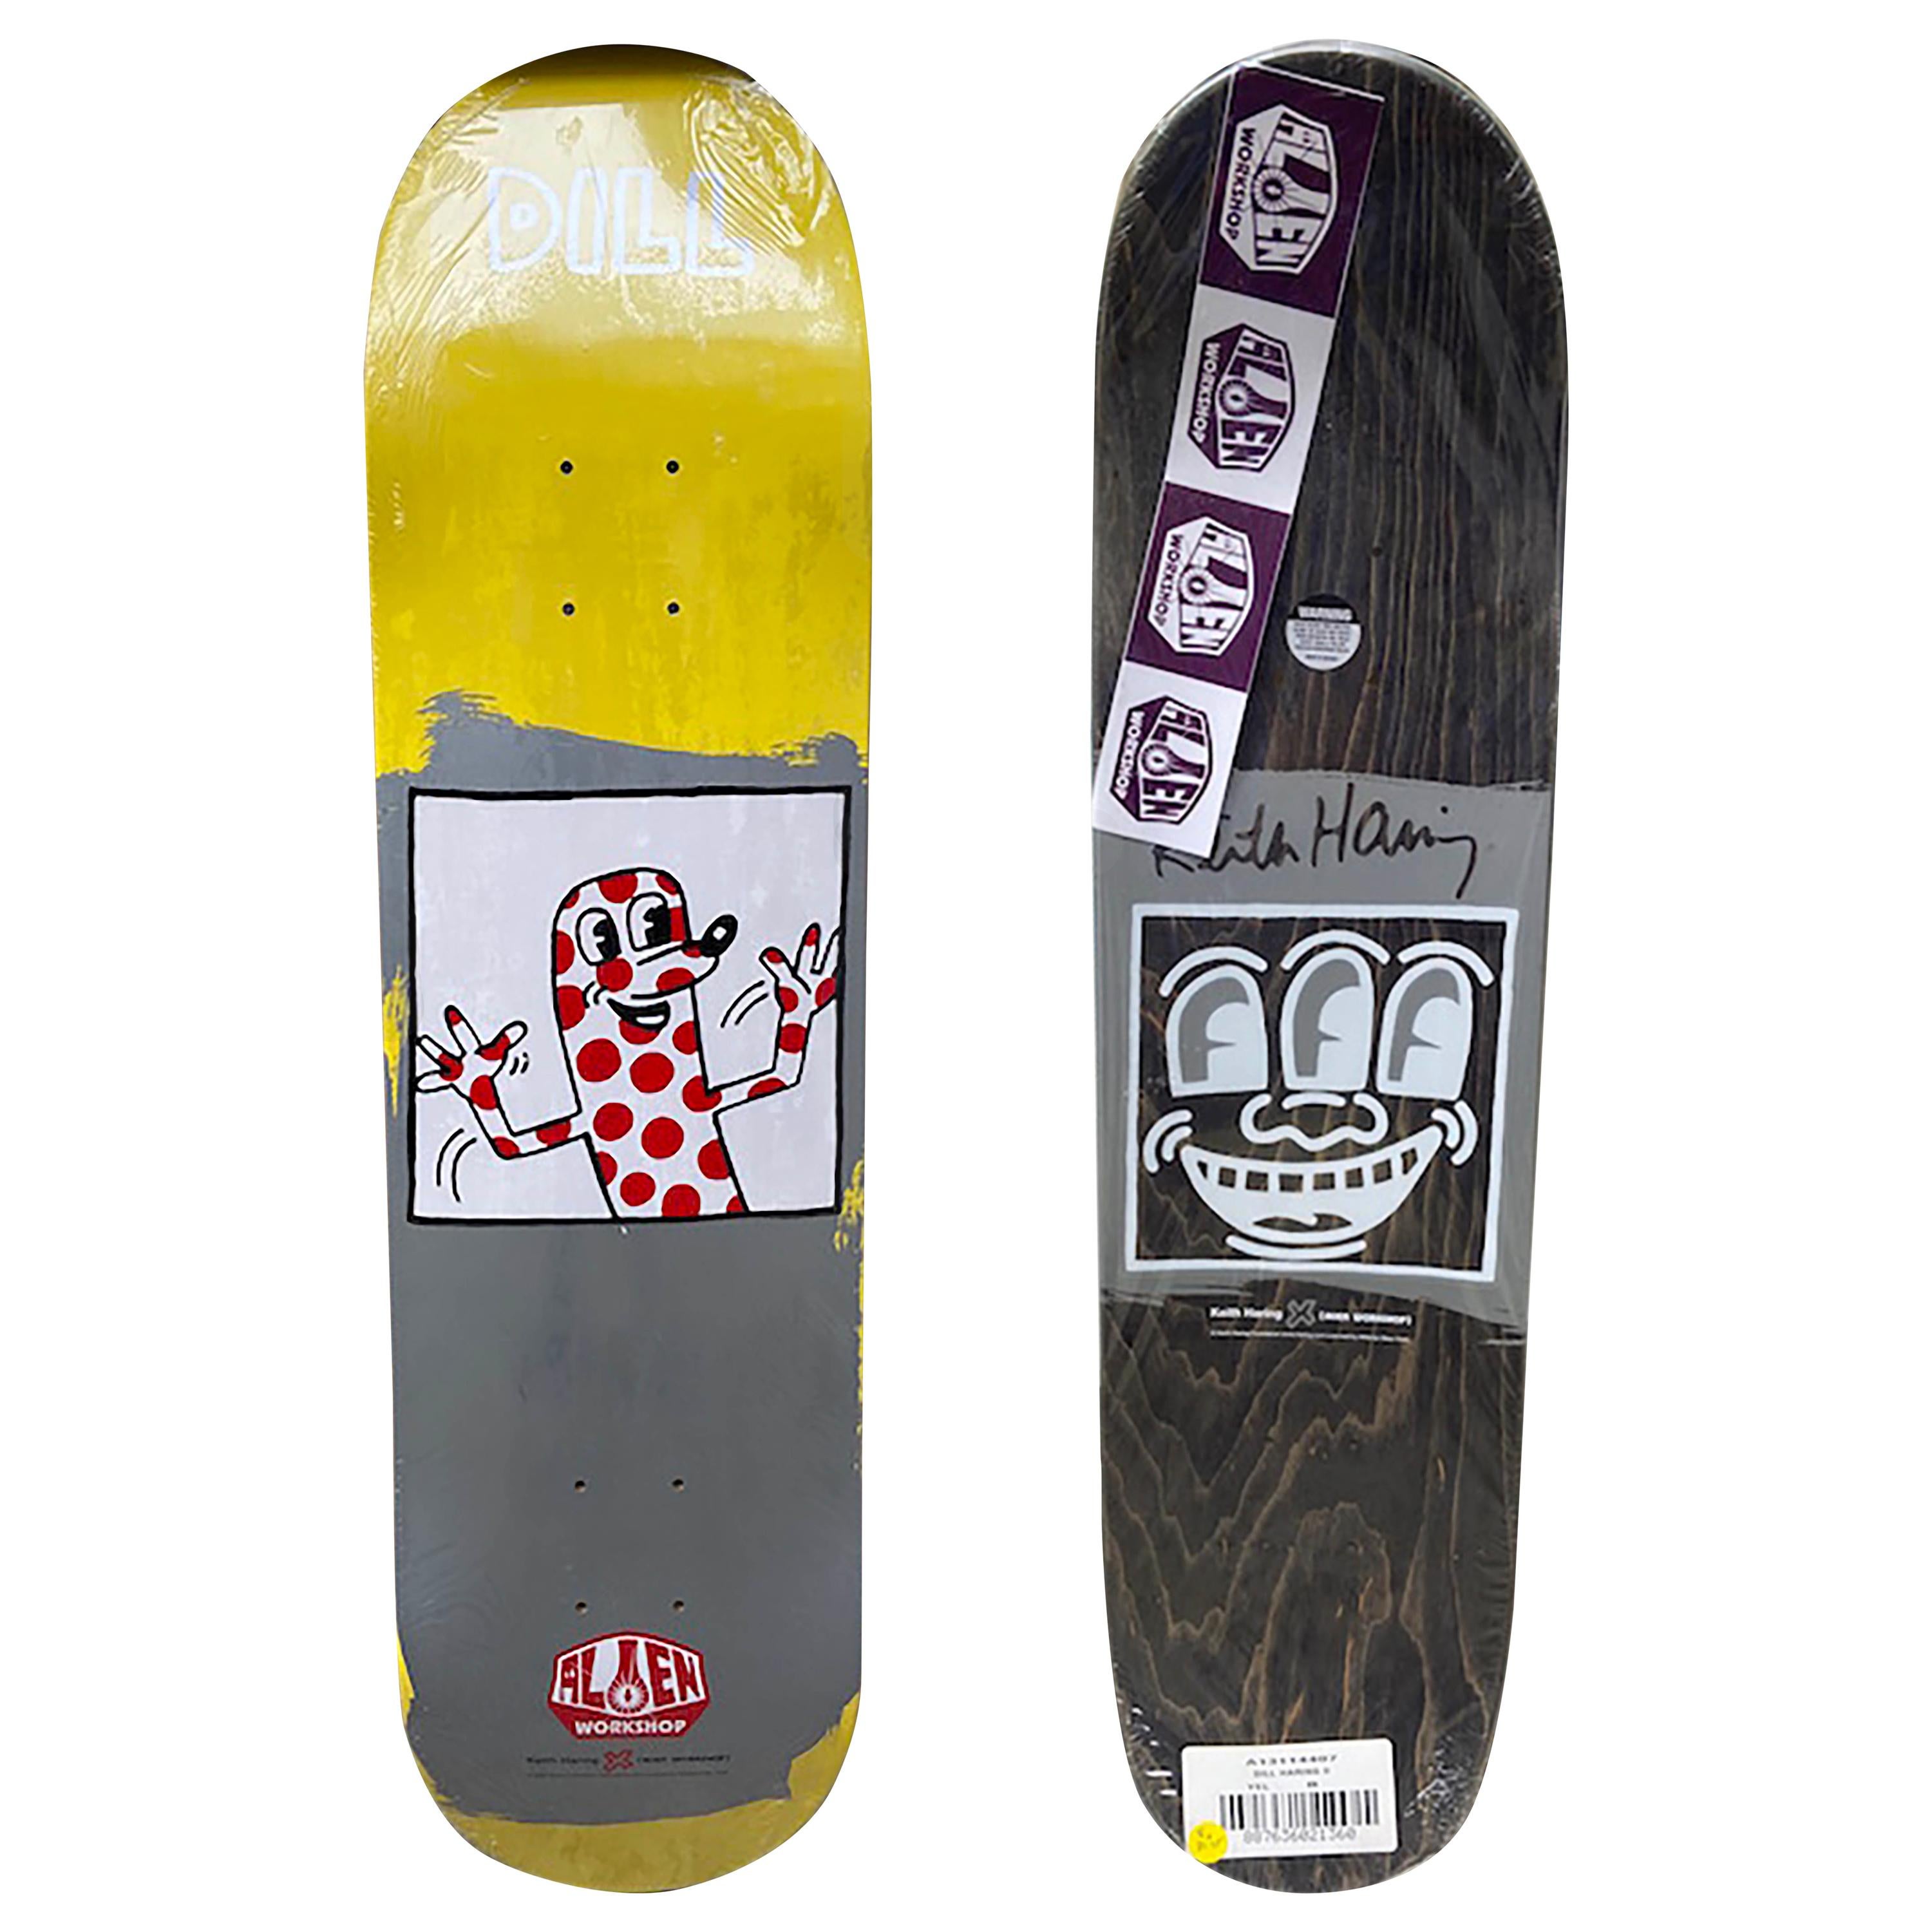 Keith Haring, DILL Skate Board Collector